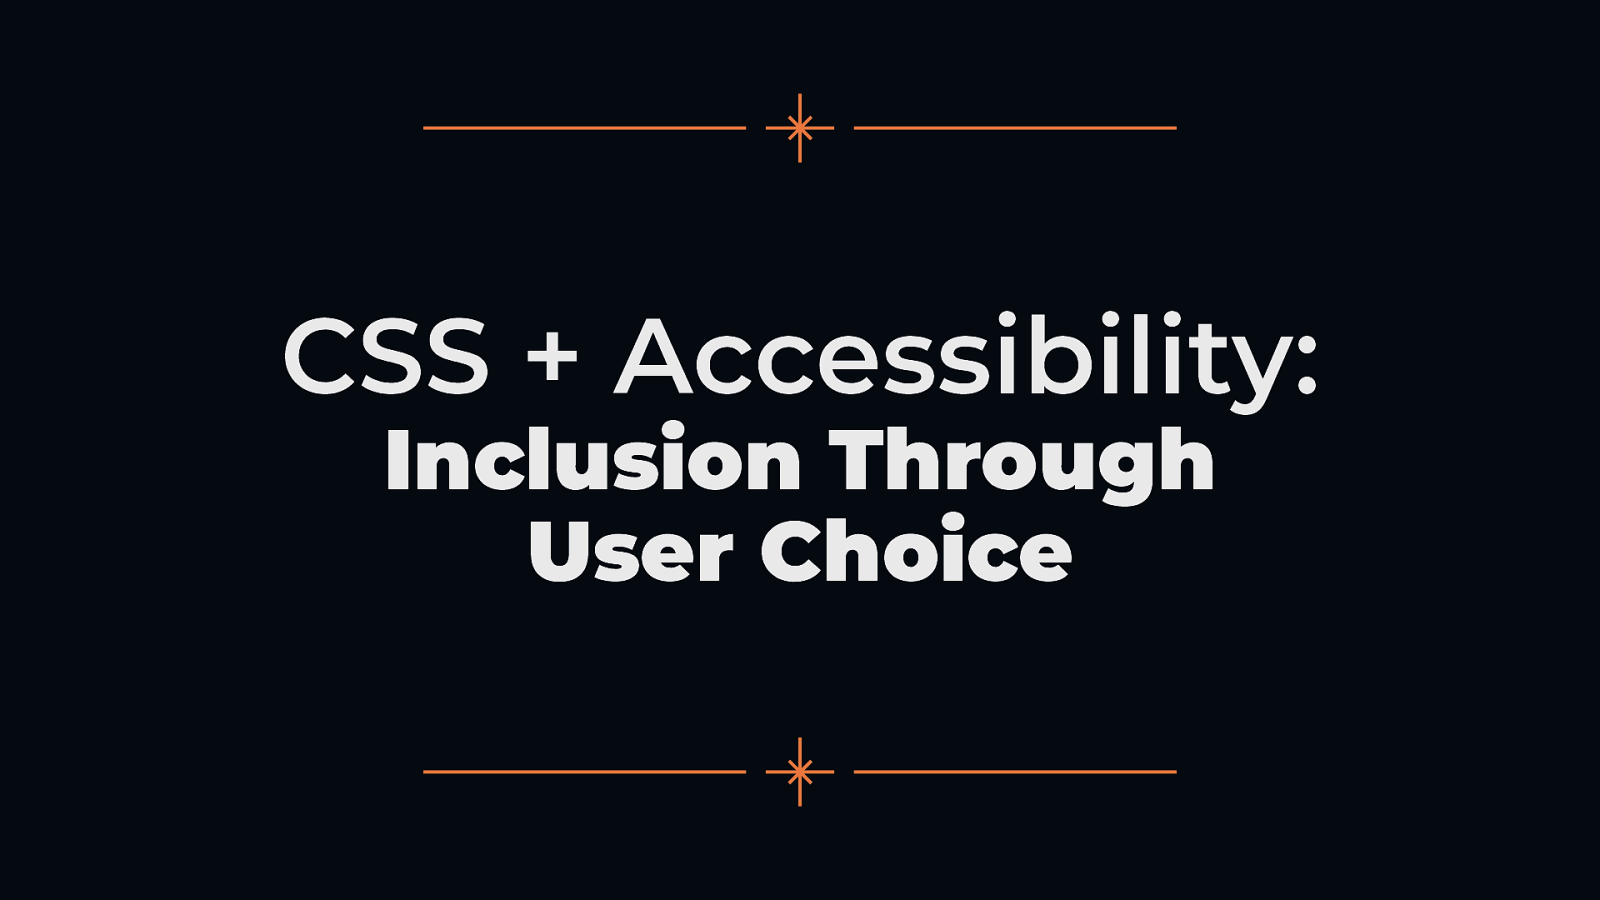 CSS + Accessibility: Inclusion Through User Choice by Carie Fisher